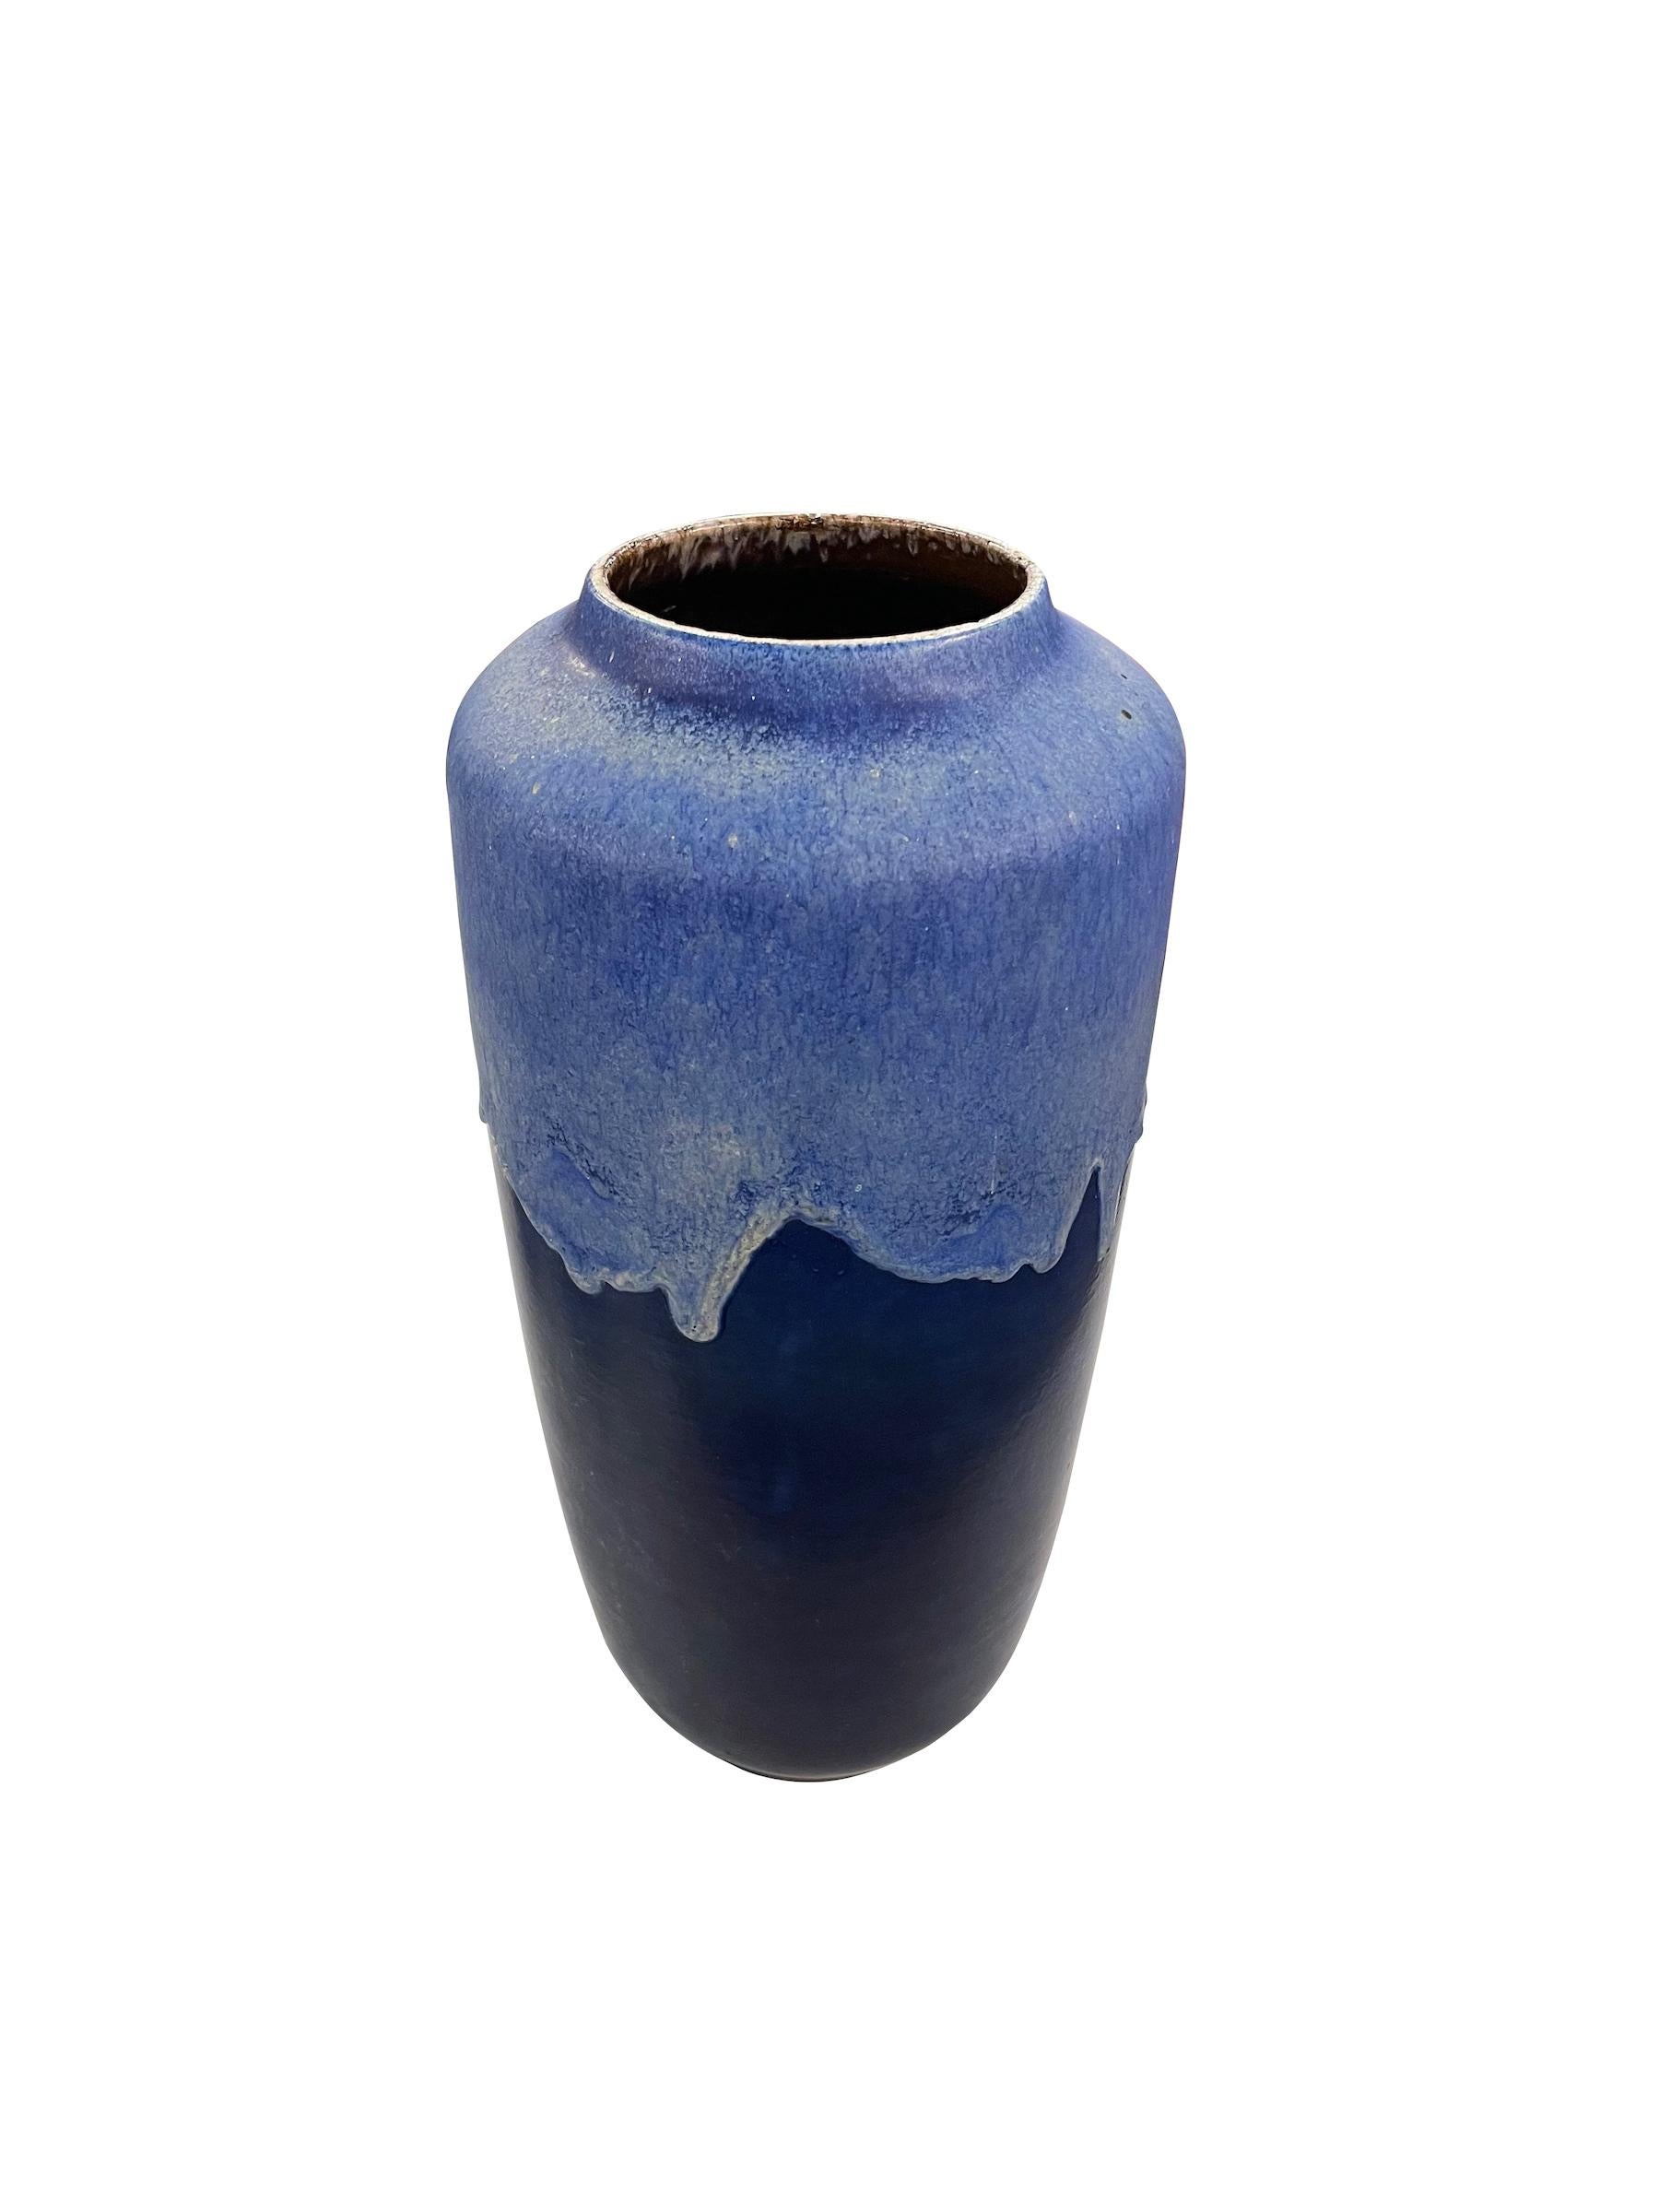 Mid Century German ceramic vase with light blue glazed top dripping to darker blue base.
Can hold water.
Sits nicely with S6757 and S6758.
ARRIVING APRIL